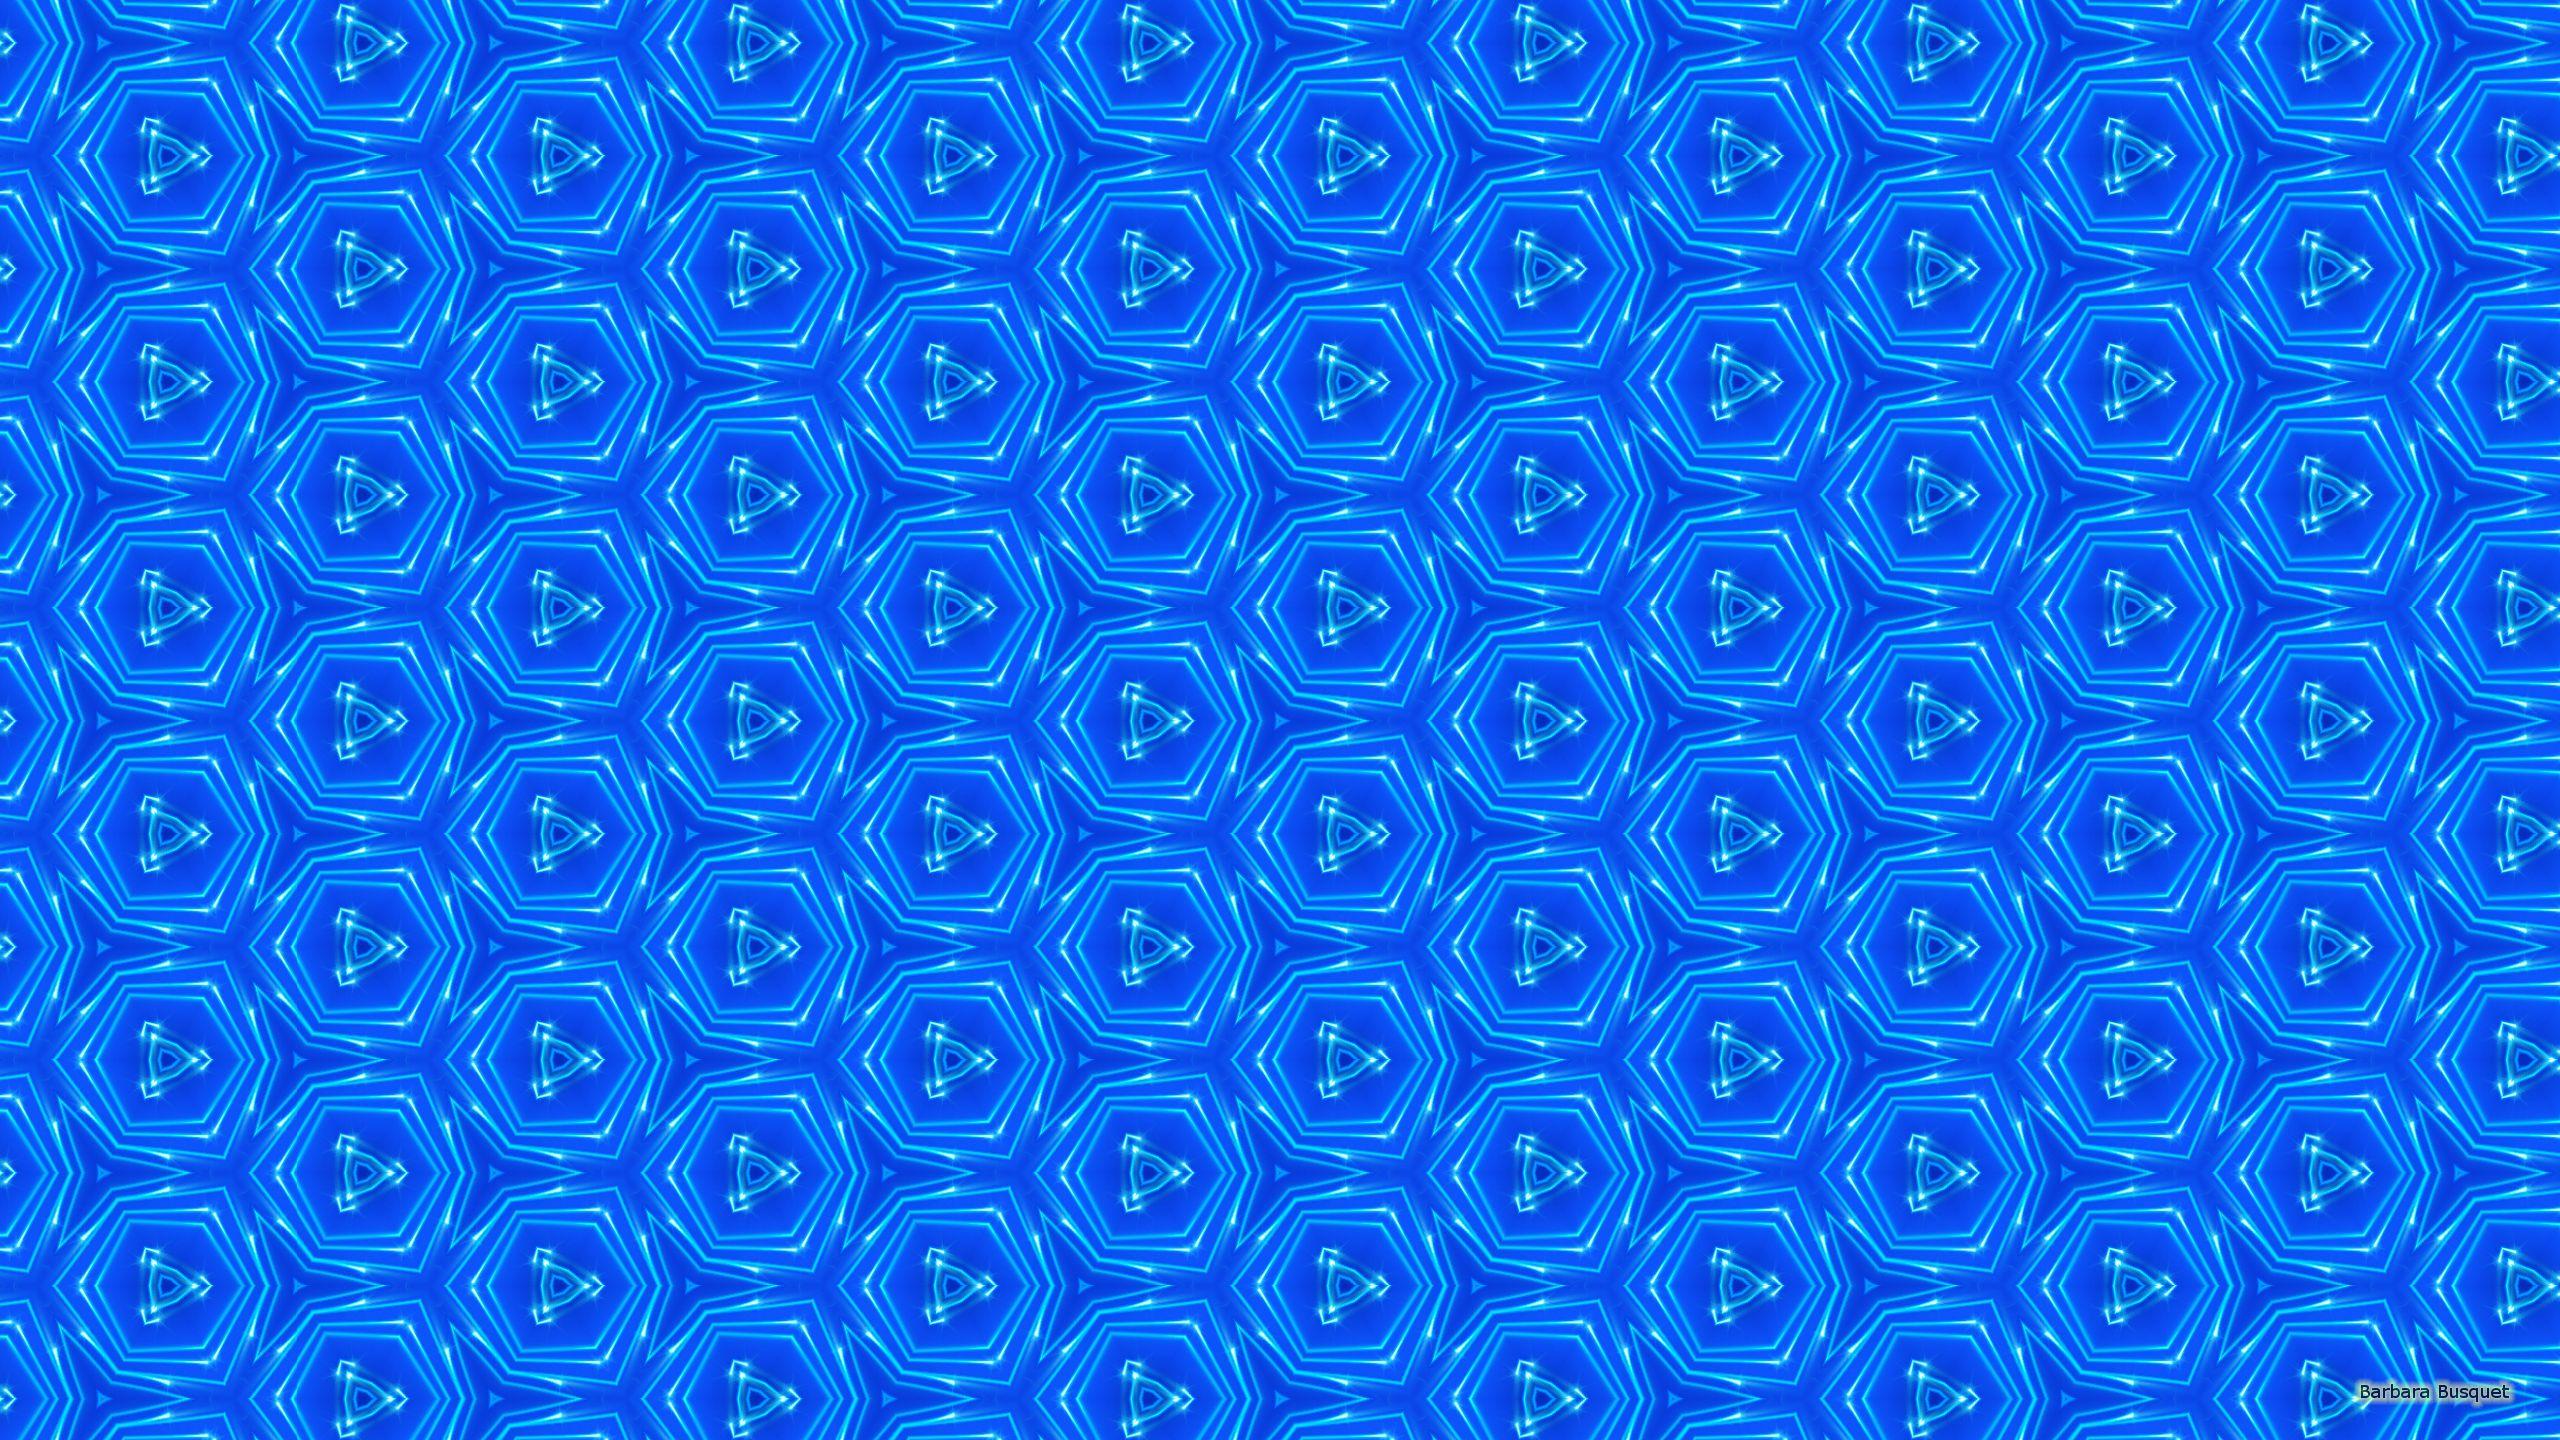 Blue and White Pattern Wallpapers - Top Free Blue and White Pattern ...